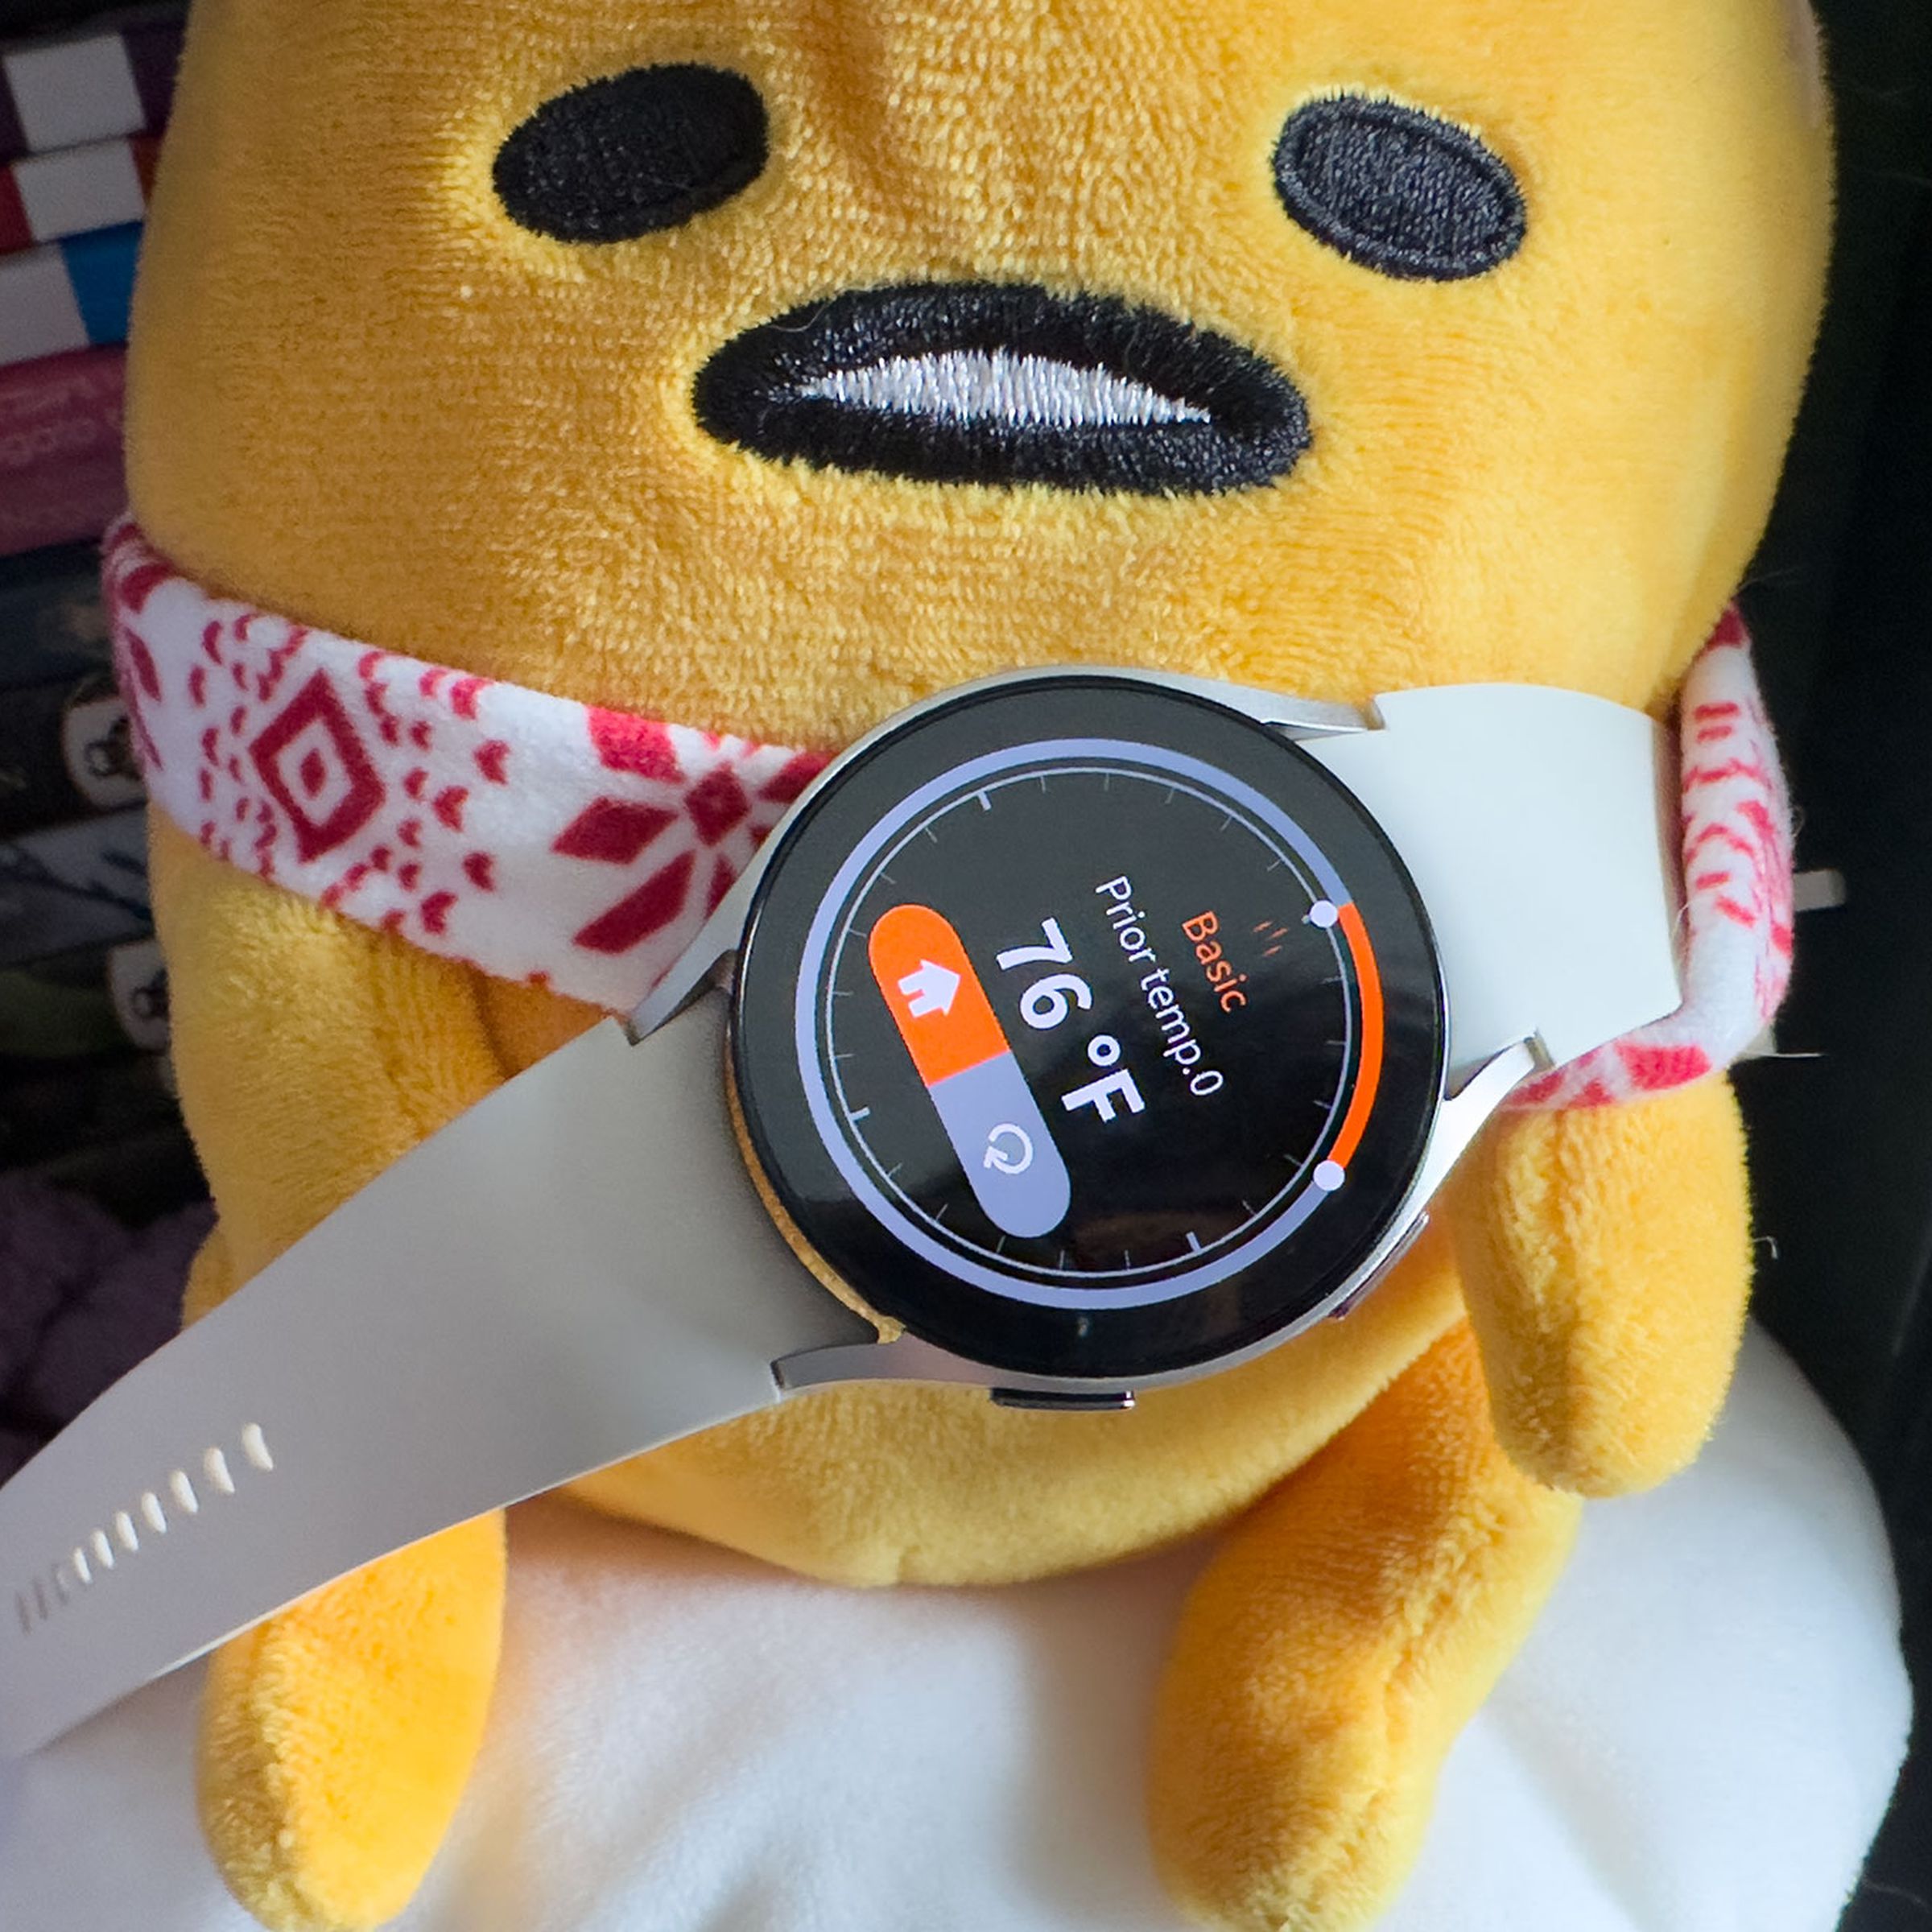 Samsung Galaxy Watch 6 showing the Thermo Check app on a Gudetama plushie.